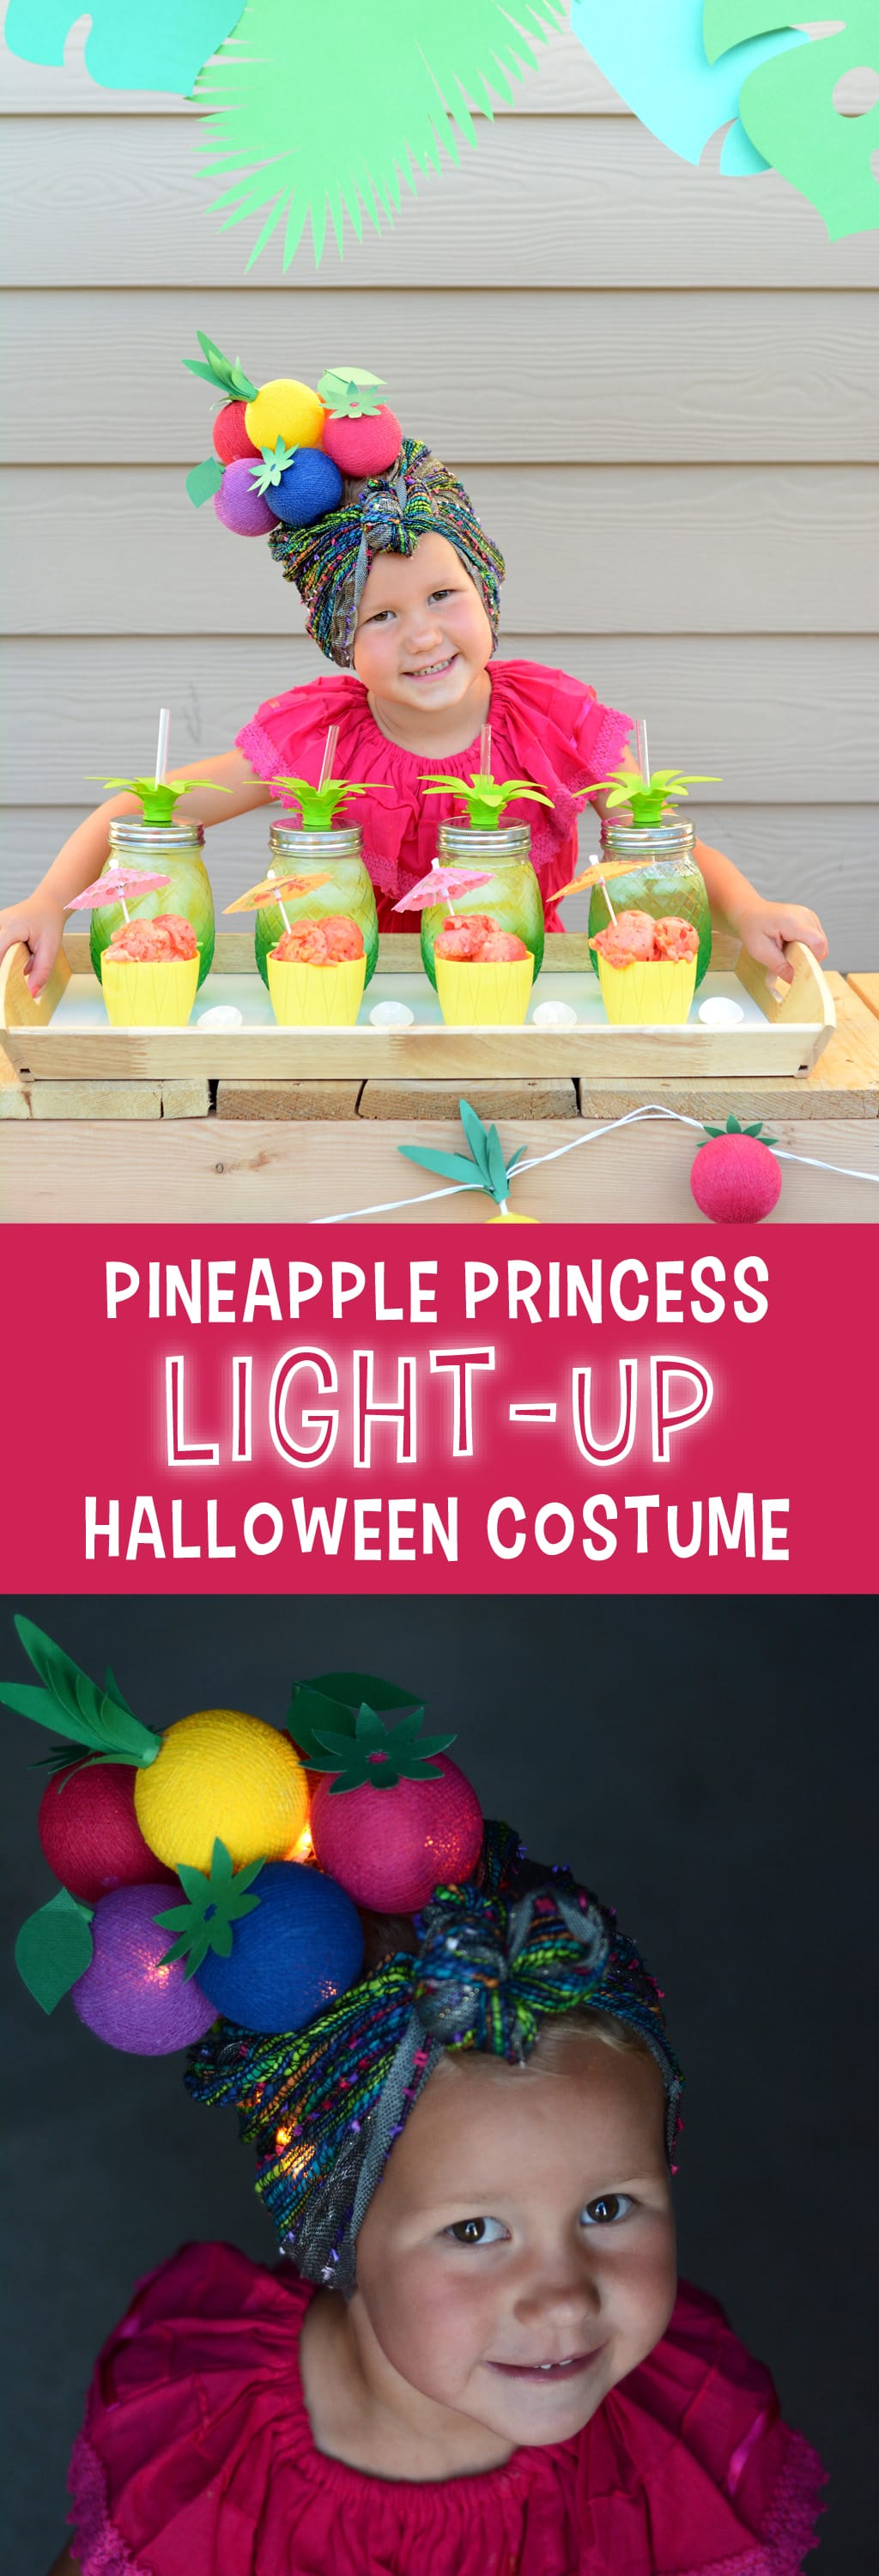 DIY Pineapple Princess Light Up Halloween Costume | A simple, pineapple princess light-up halloween costume that will help you see your little trick-or-treater on Halloween night.